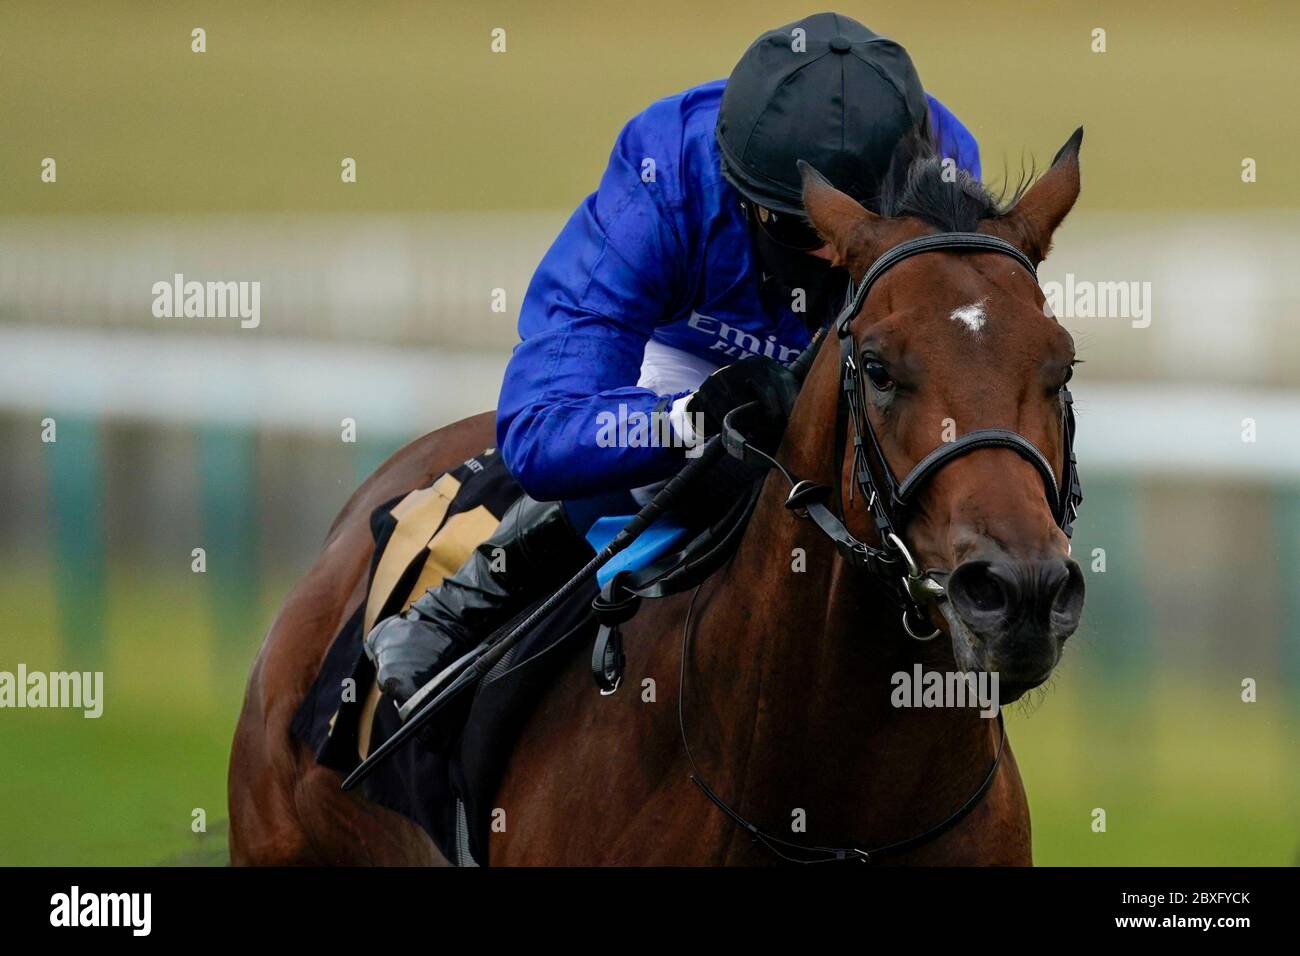 William Buick riding Noble Dynasty in action at Newmarket Racecourse. Stock Photo